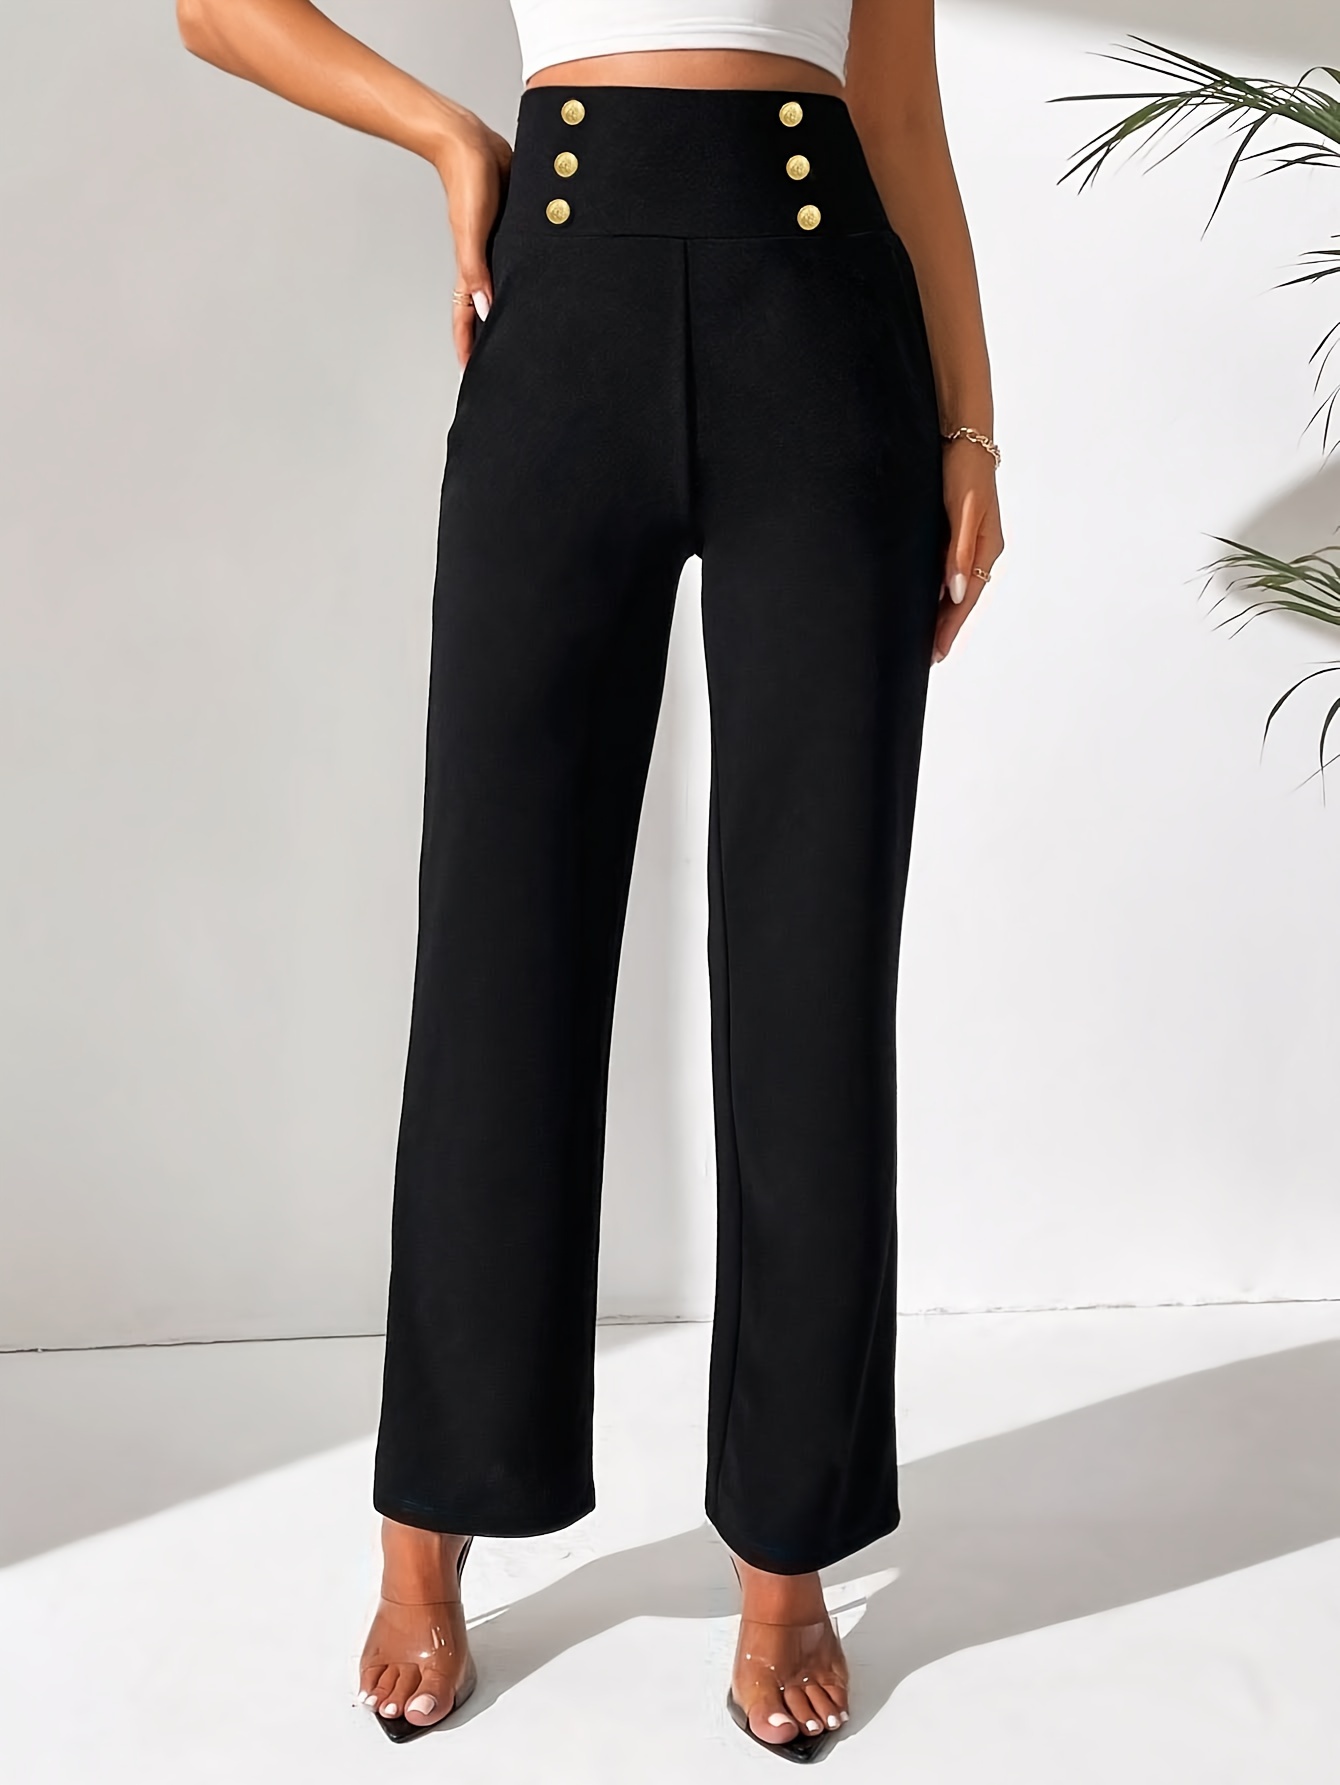 Quiz Woven High Waisted Tailored Trouser - Orange - ShopStyle Pants